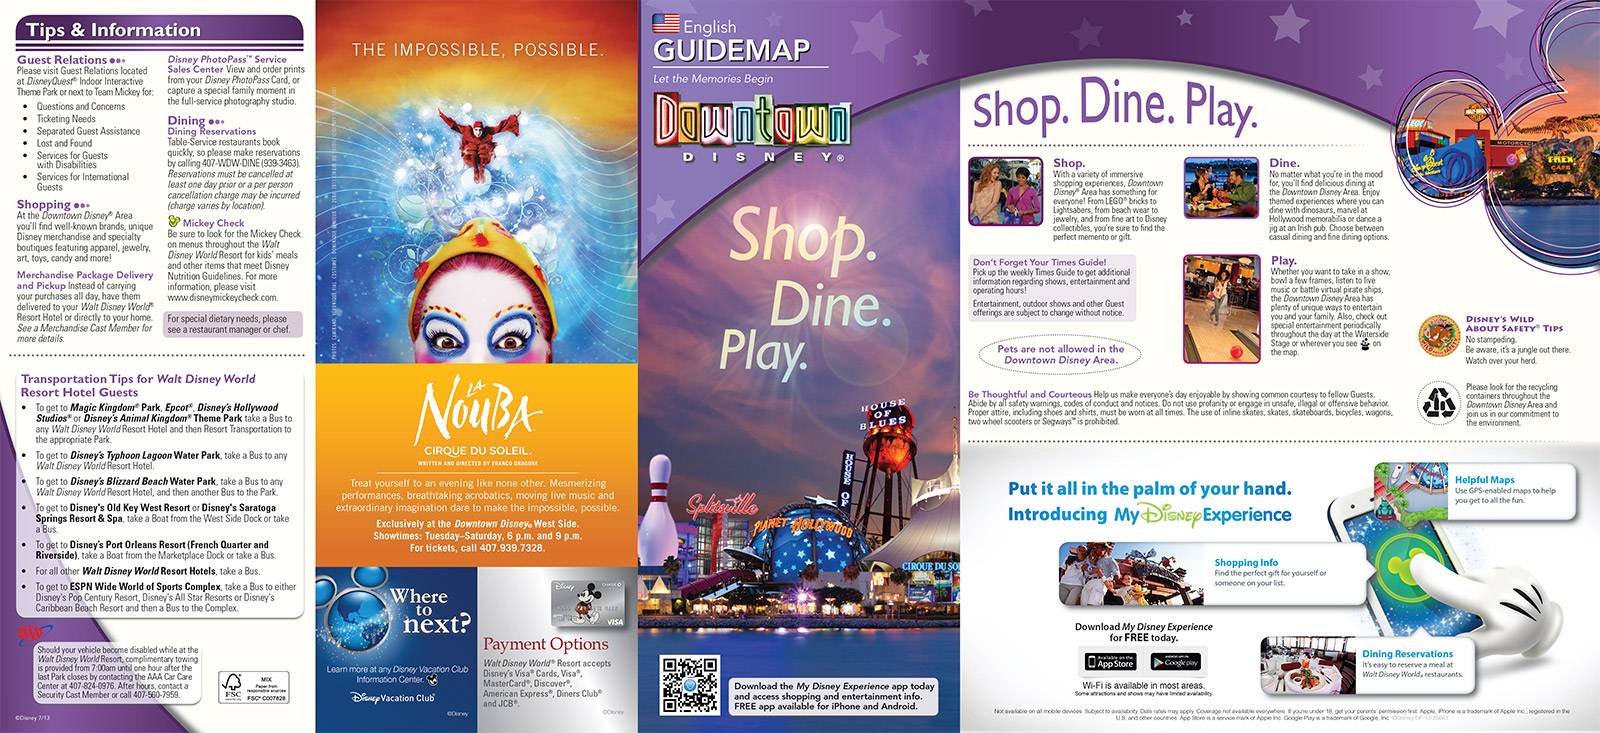 PHOTOS - New Downtown Disney guidemap shows Pleasure Island demolition and revised parking lots